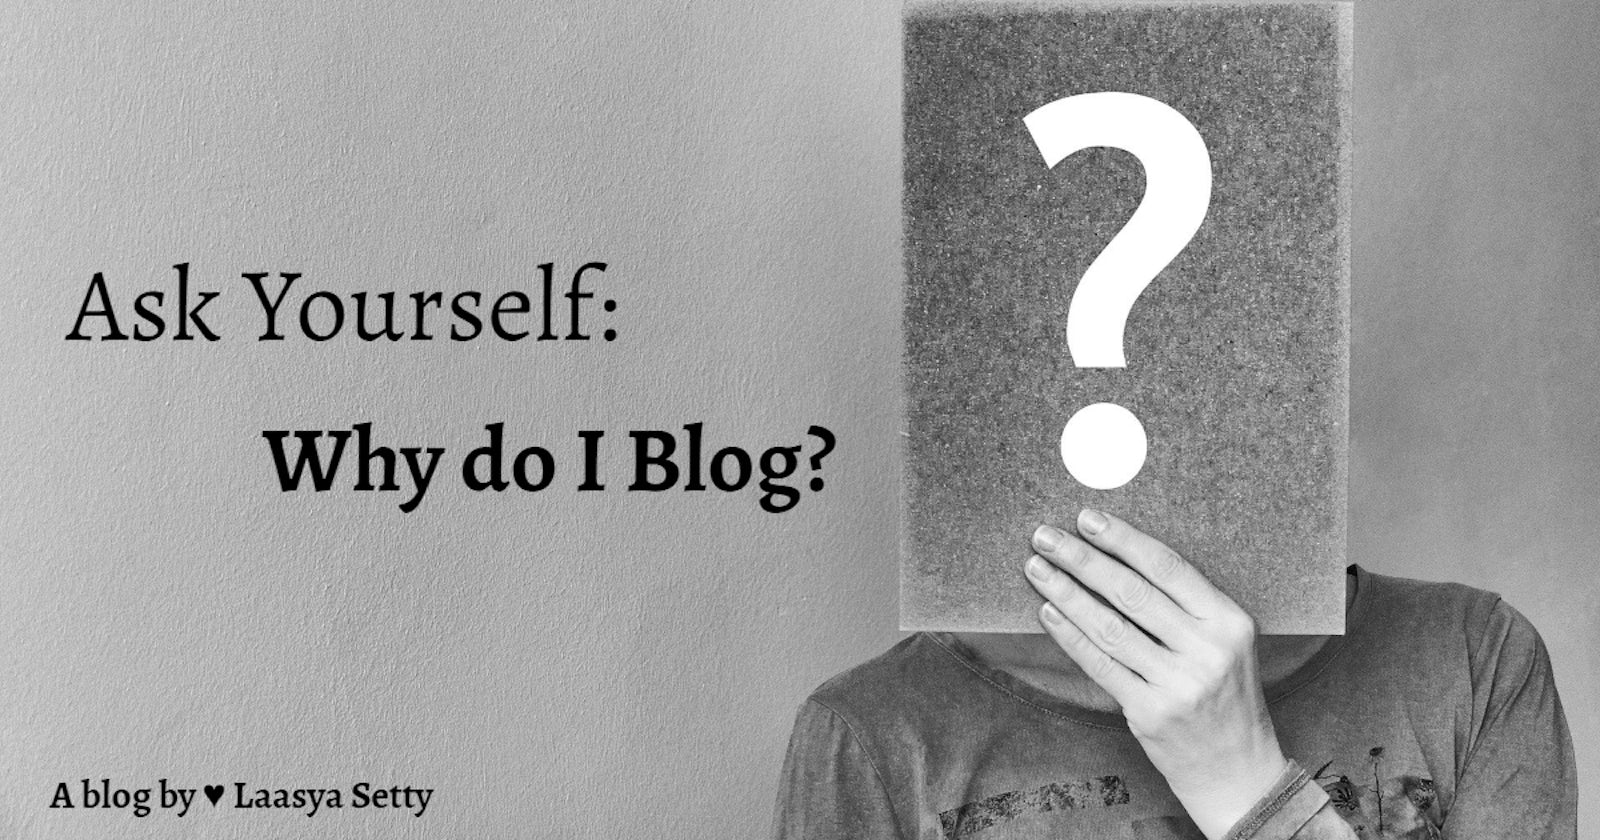 Ask Yourself: Why do I Blog?